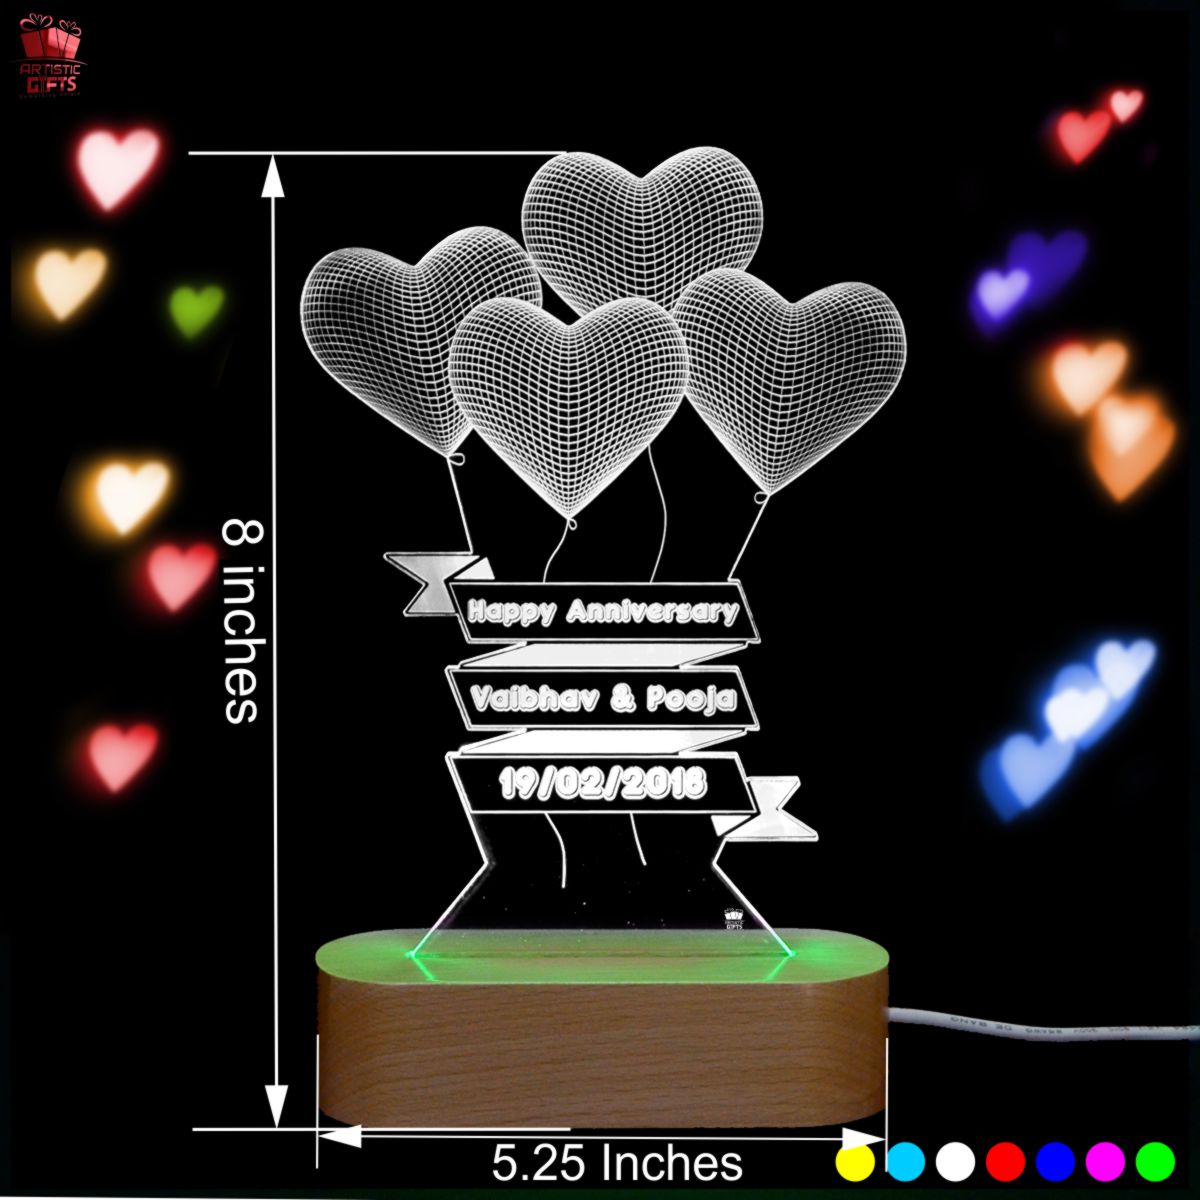 3D Illusion Multi-Color LED Lamp with Heart Balloon Birthday Design